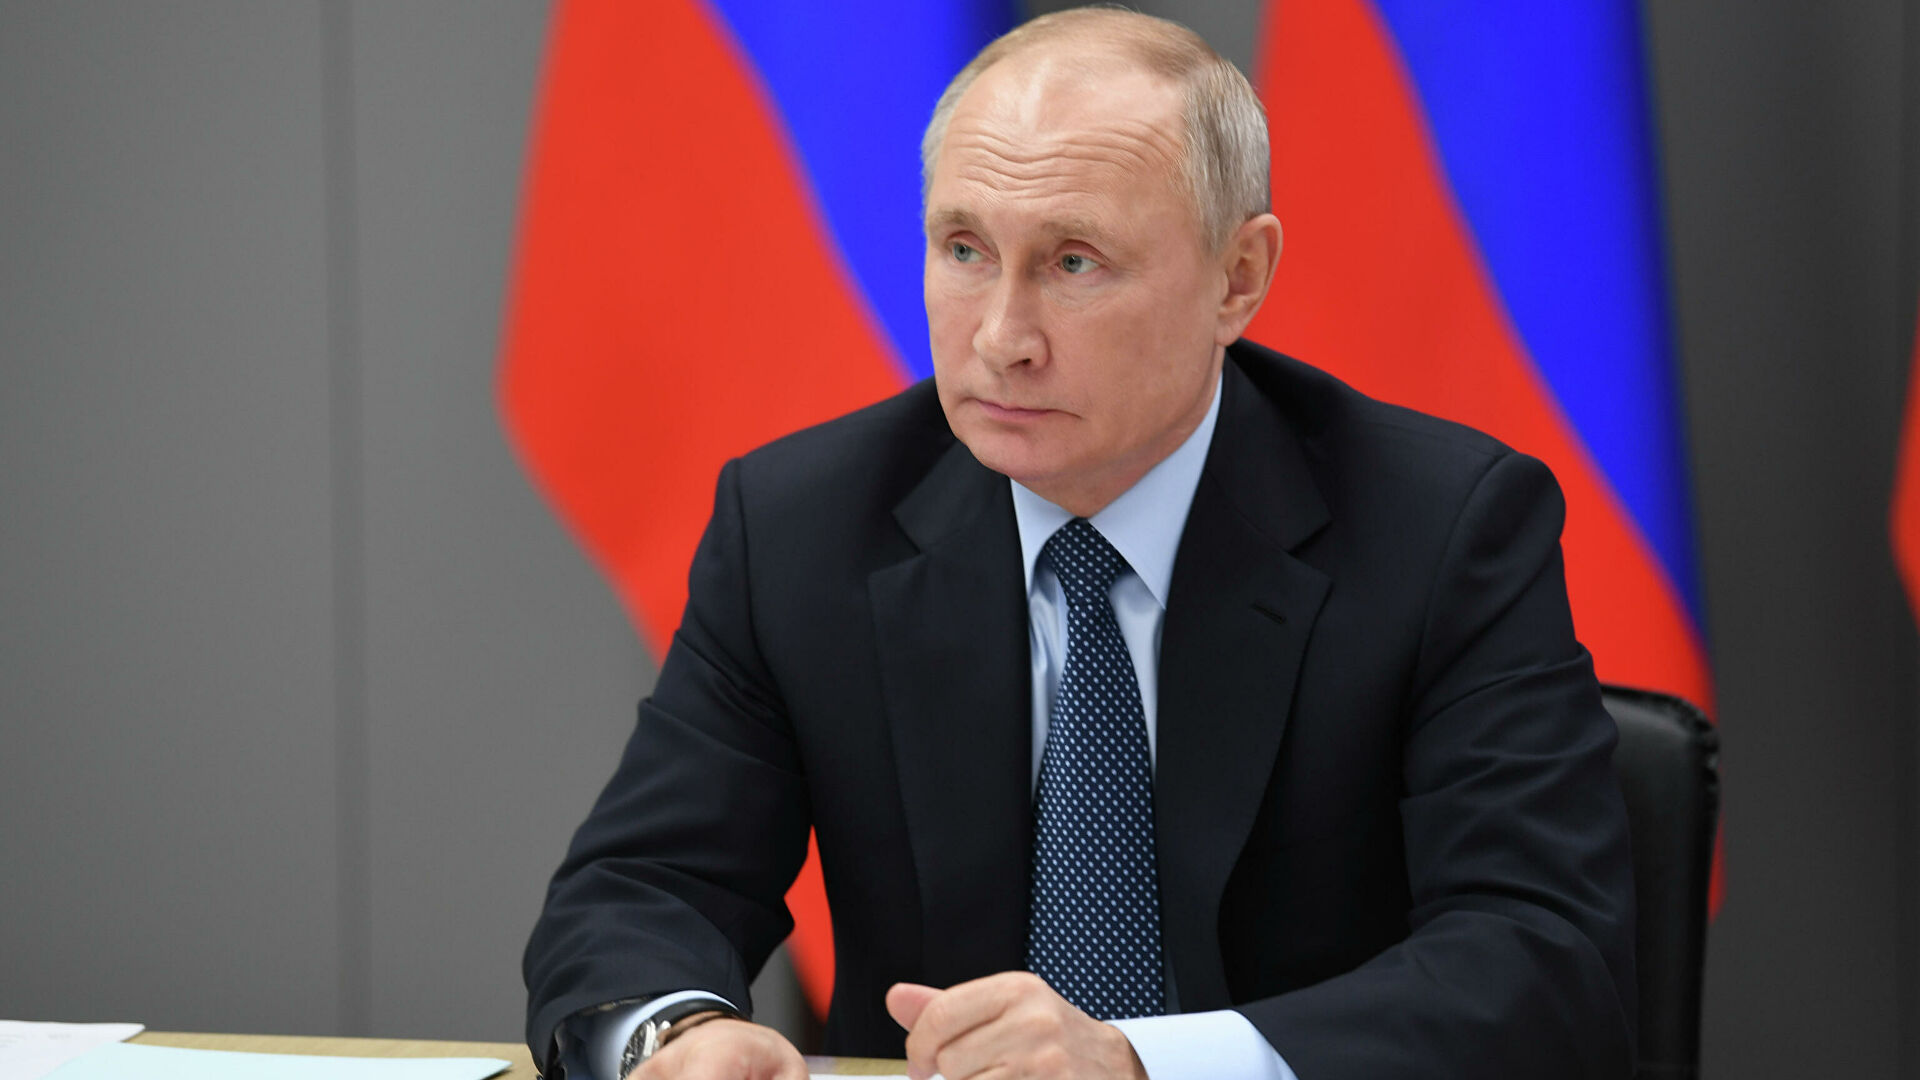 Russian President Putin Says US is to Blame for Tensions in Europe